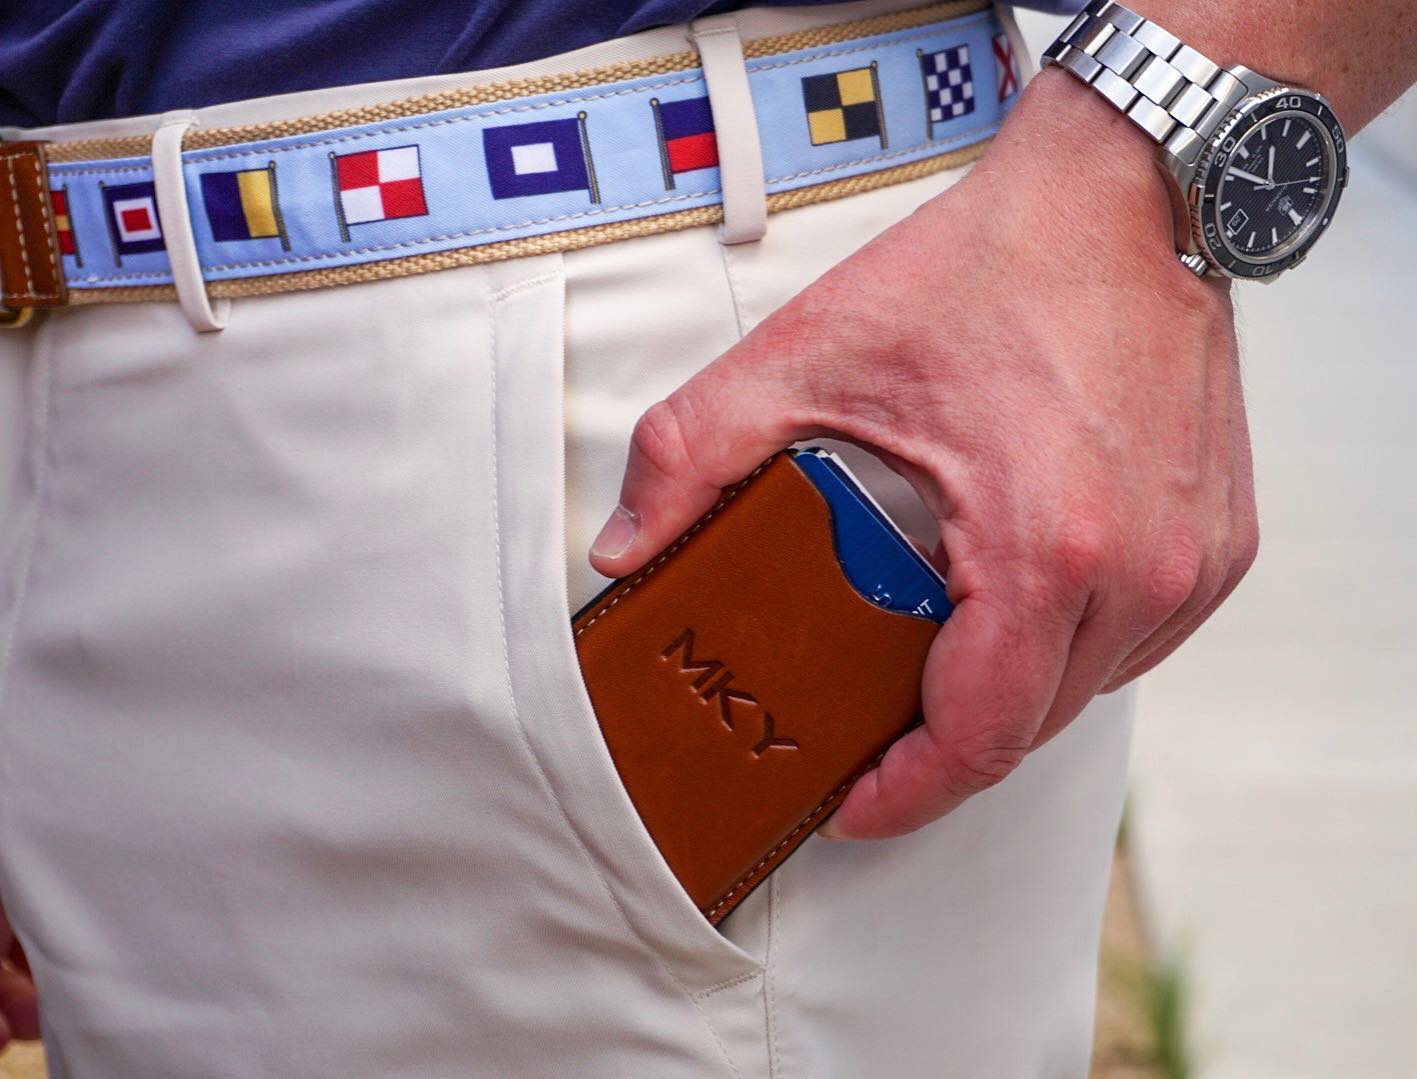 A close-up of a hand pulling a sleek leather money clip from the pocket of white trousers.